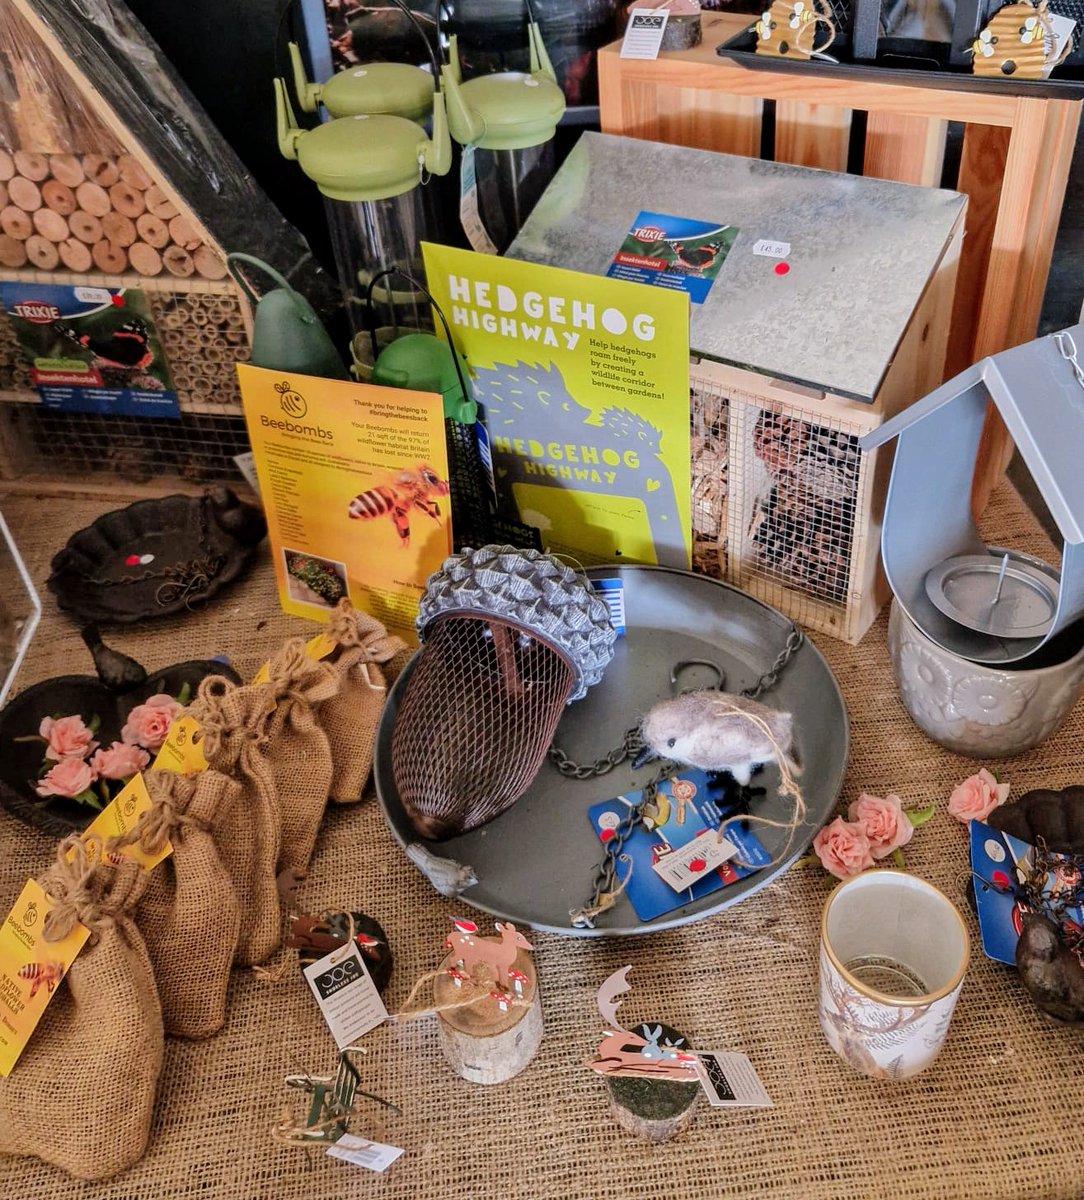 Did you know our Wildlife shop has an area dedicated to embracing wildlife in your garden? We have big hotels, bird feeders, bird nests, water baths, hedgehog highways, wild bird food, bee plant bombs too! Do come and visit we are open today (11am) and tomorrow (10am) till 4pm.